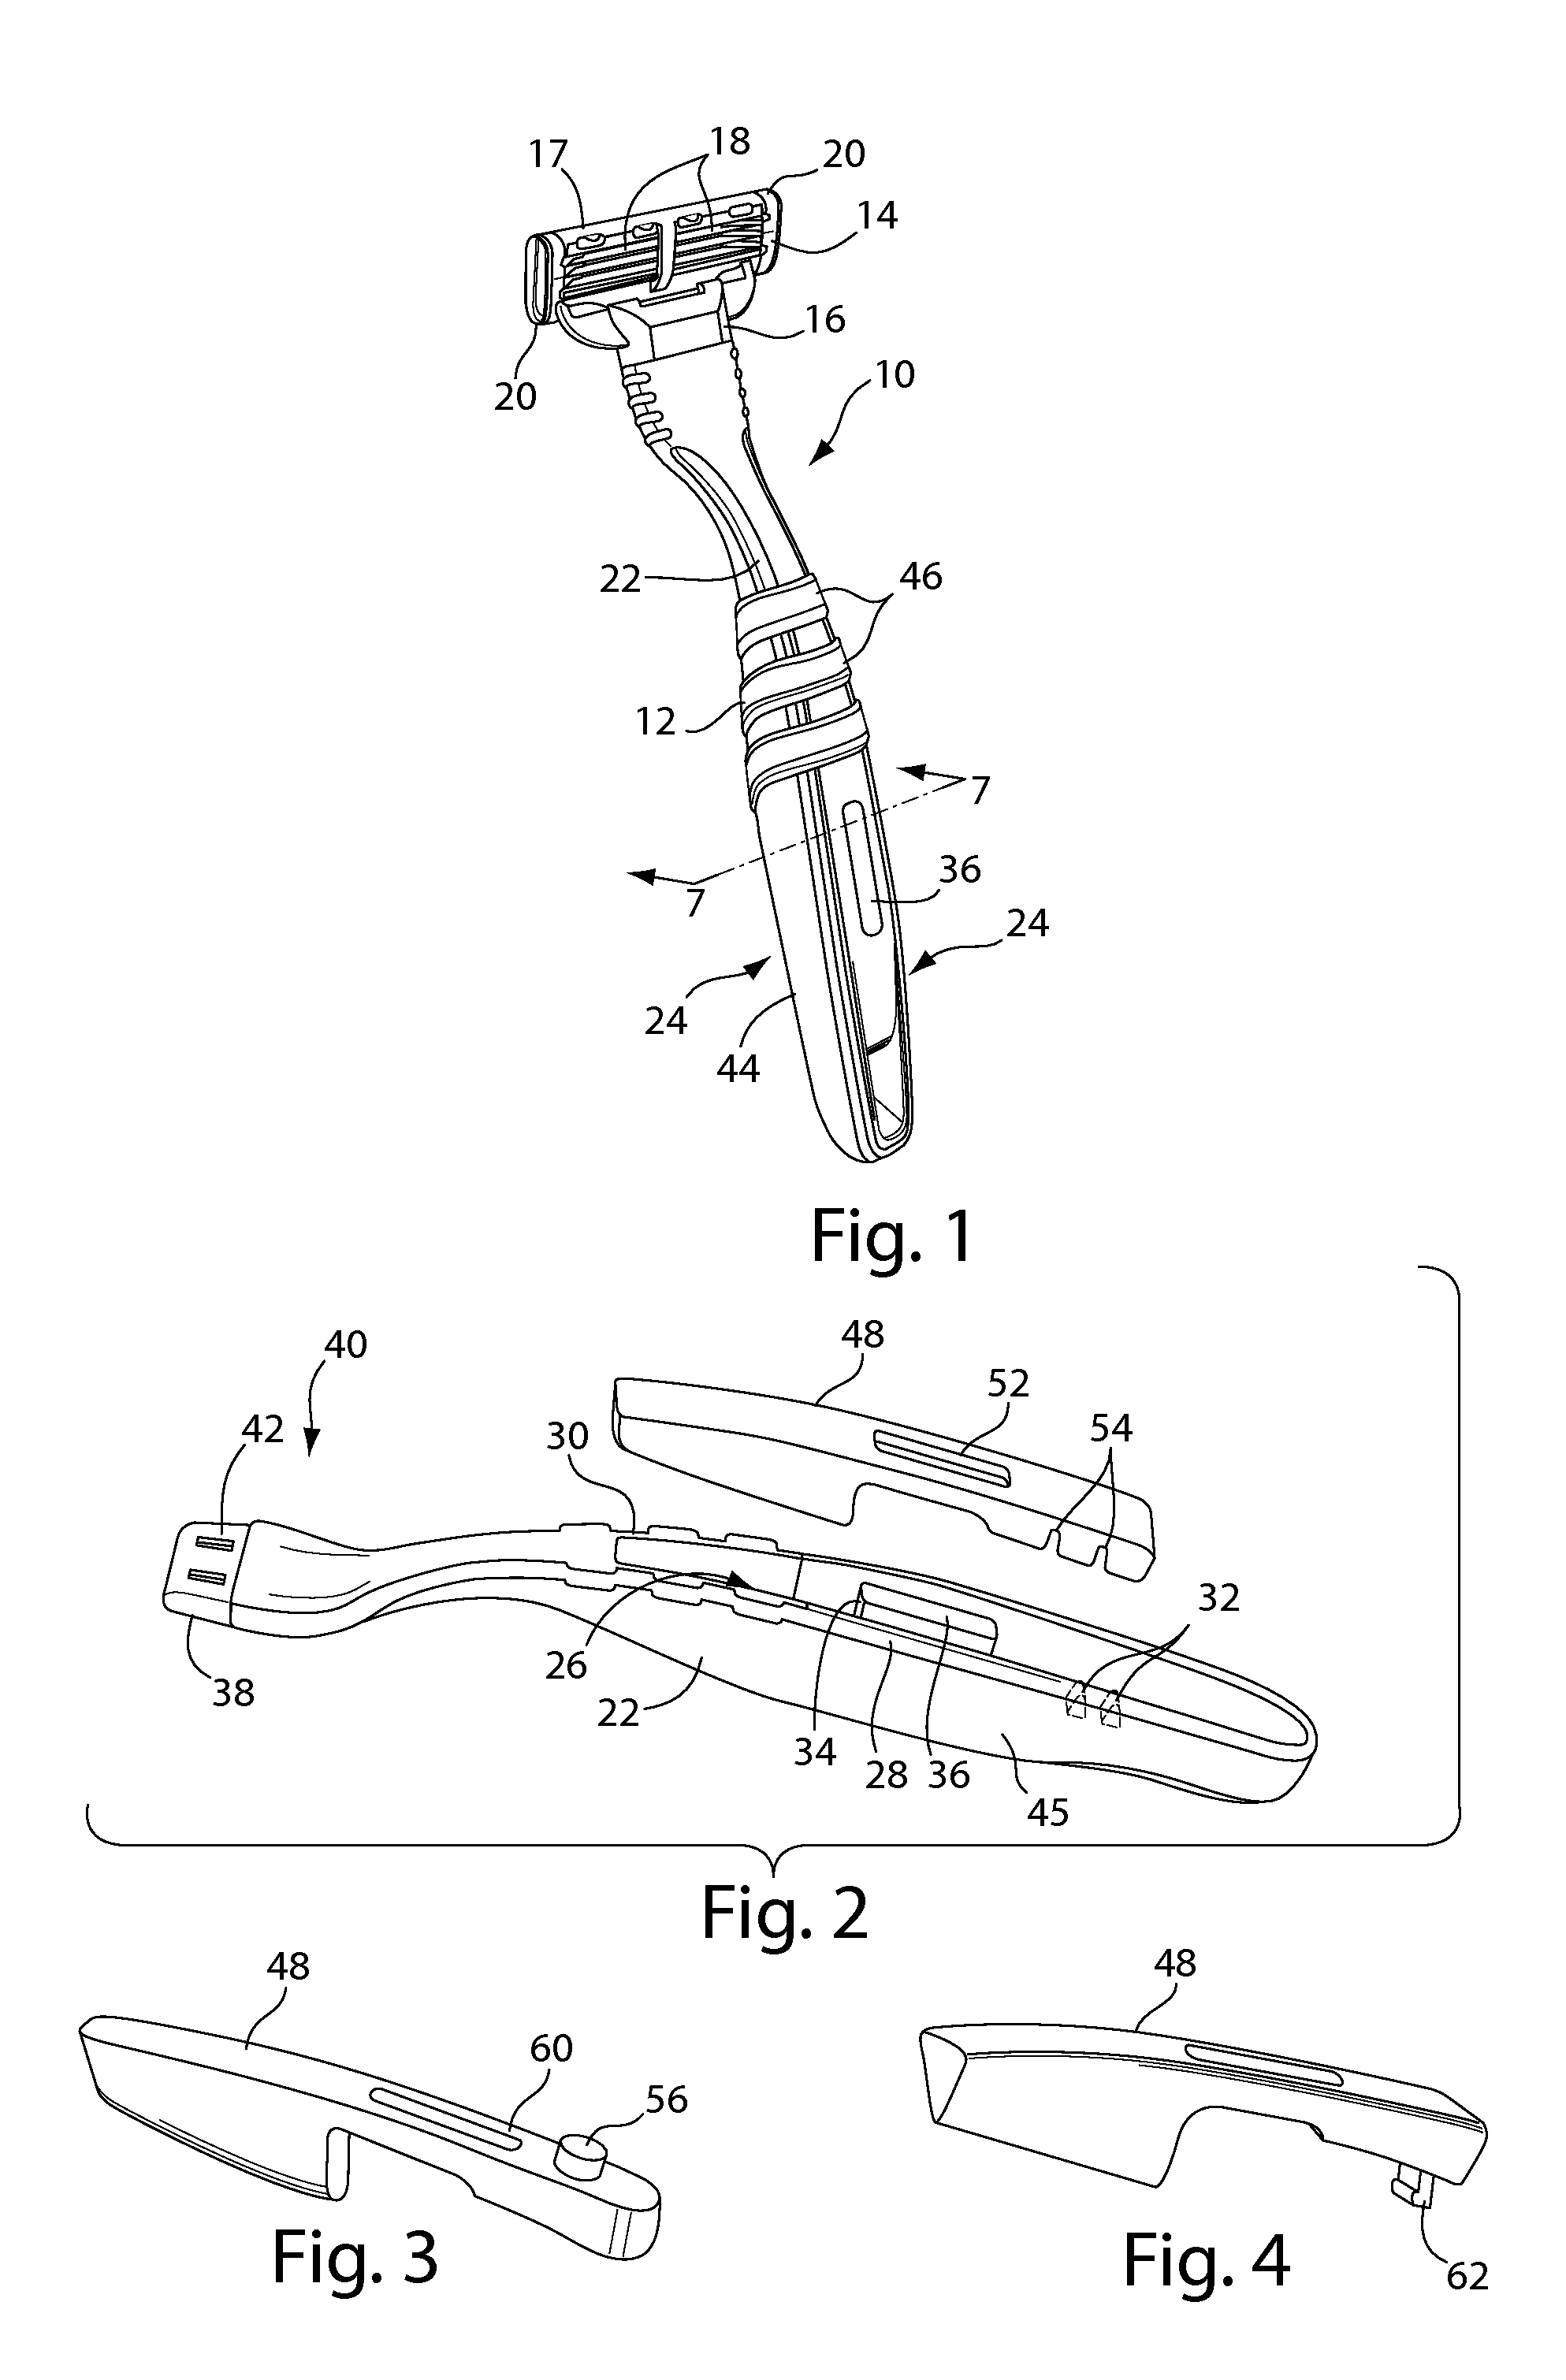 Method for making a handle for a personal grooming device